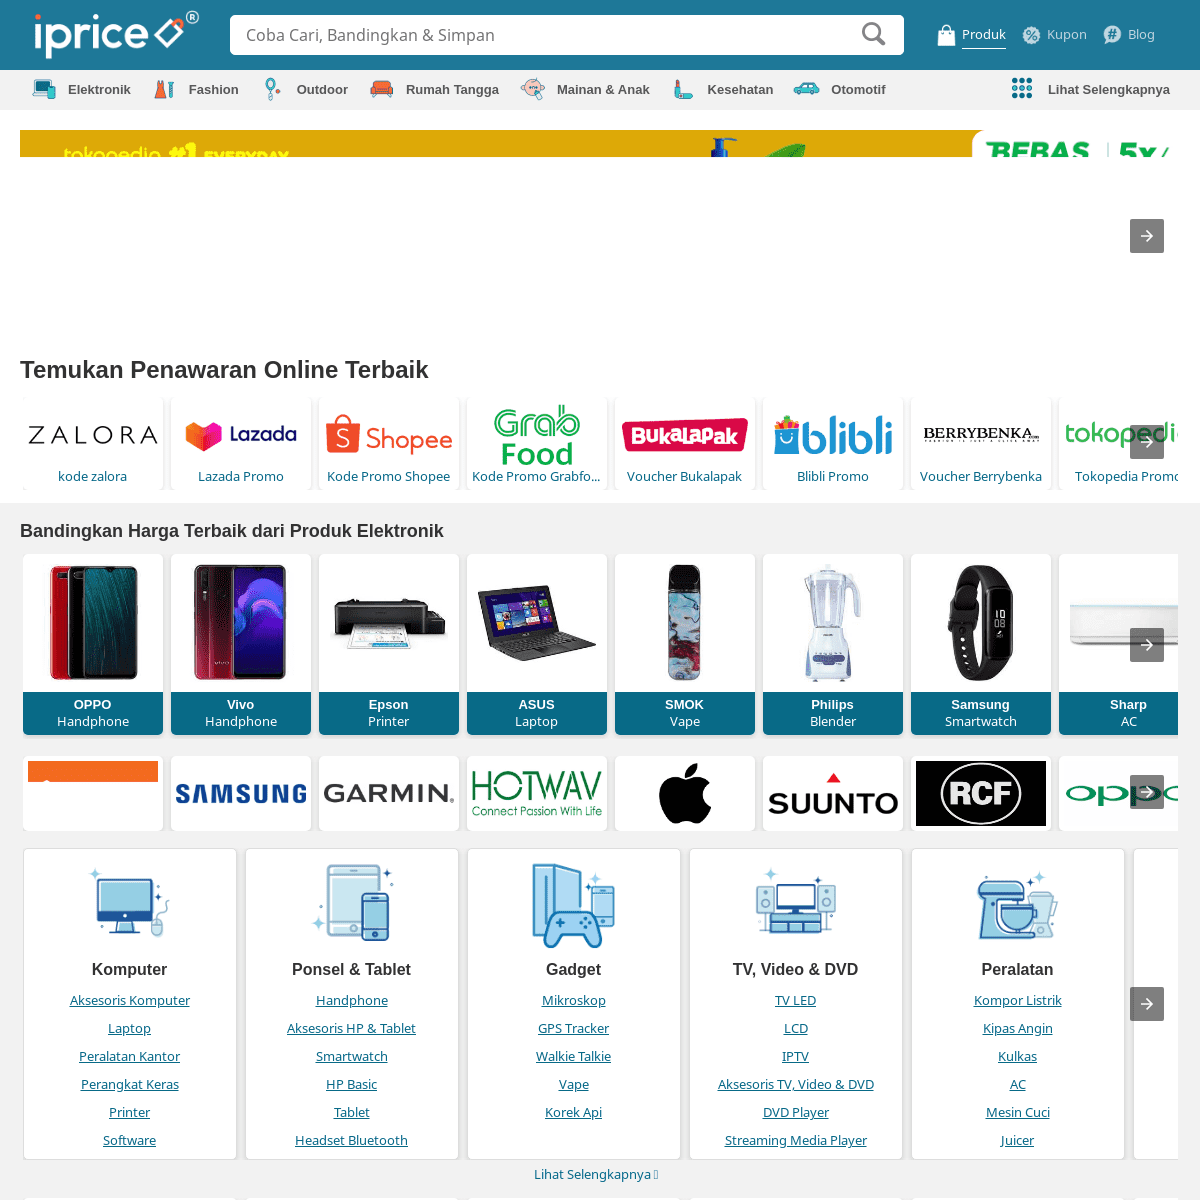 A complete backup of iprice.co.id